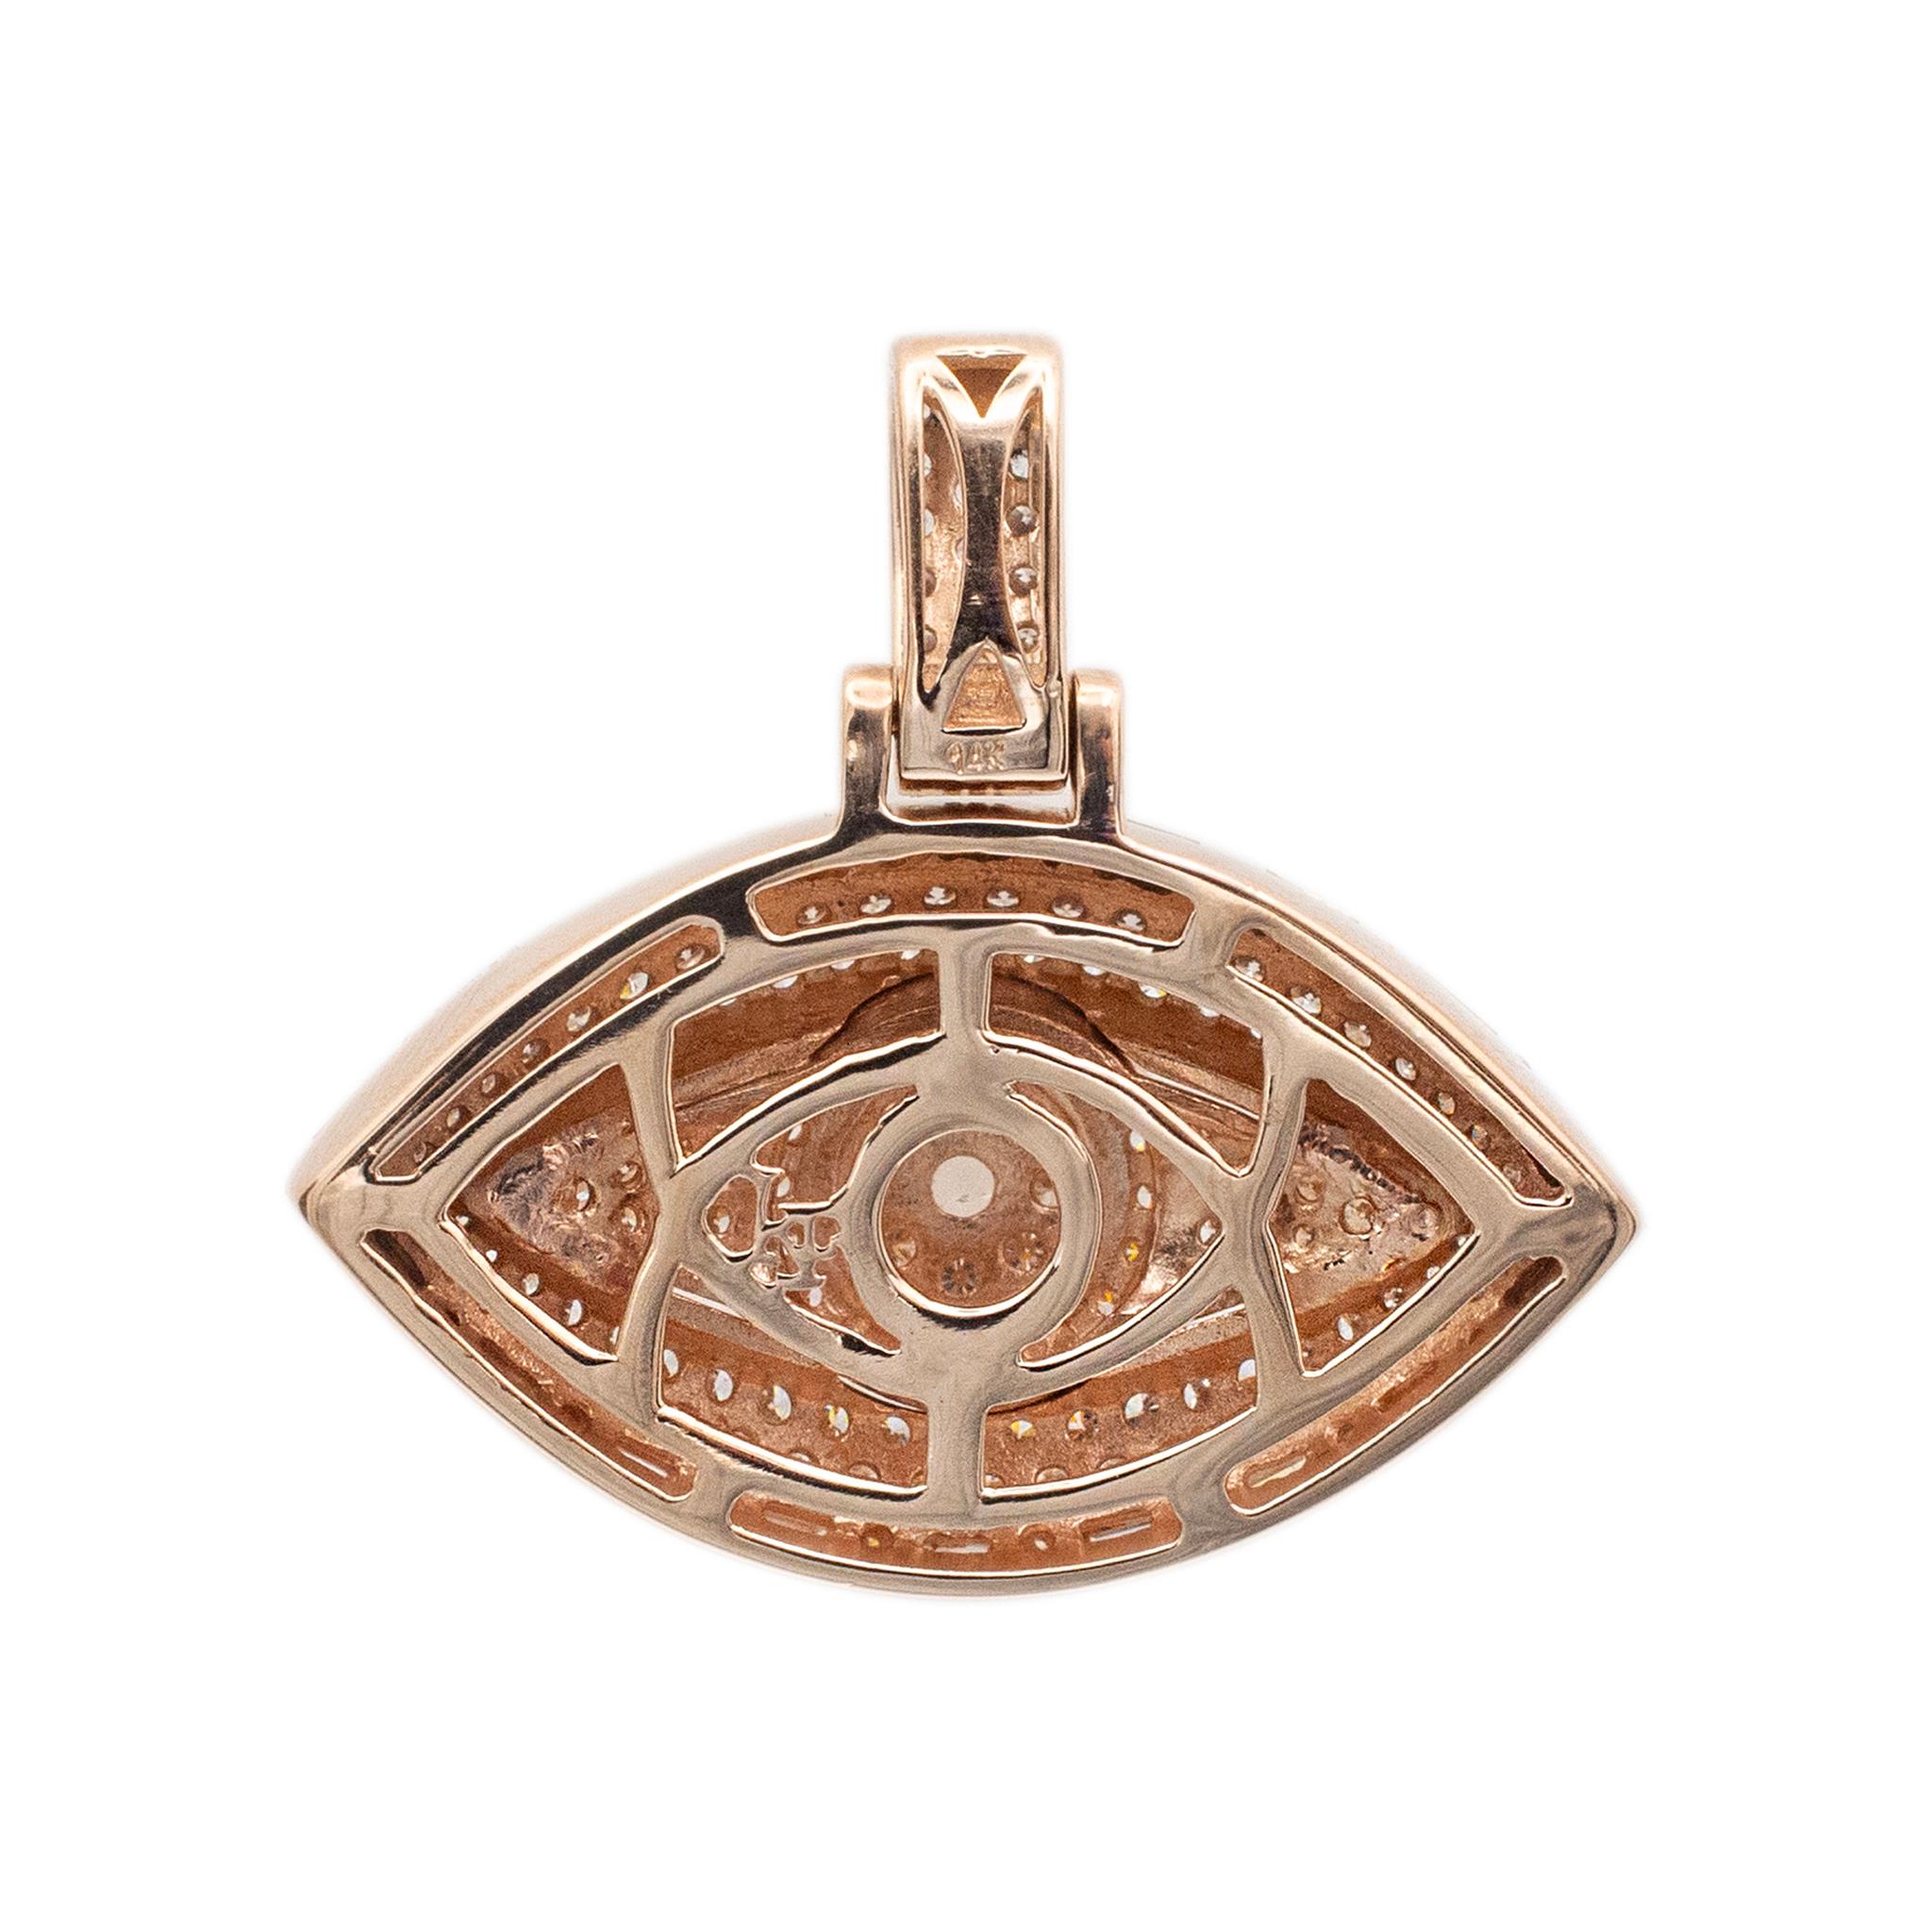 Metal Type: 14K Rose Gold

Length: 1.25 inches

Width: 1.25 inches

Weight: 12.00 grams

14K rose gold symbol, diamond cluster pendant. The metal was tested and determined to be 14K rose gold. Engraved with 